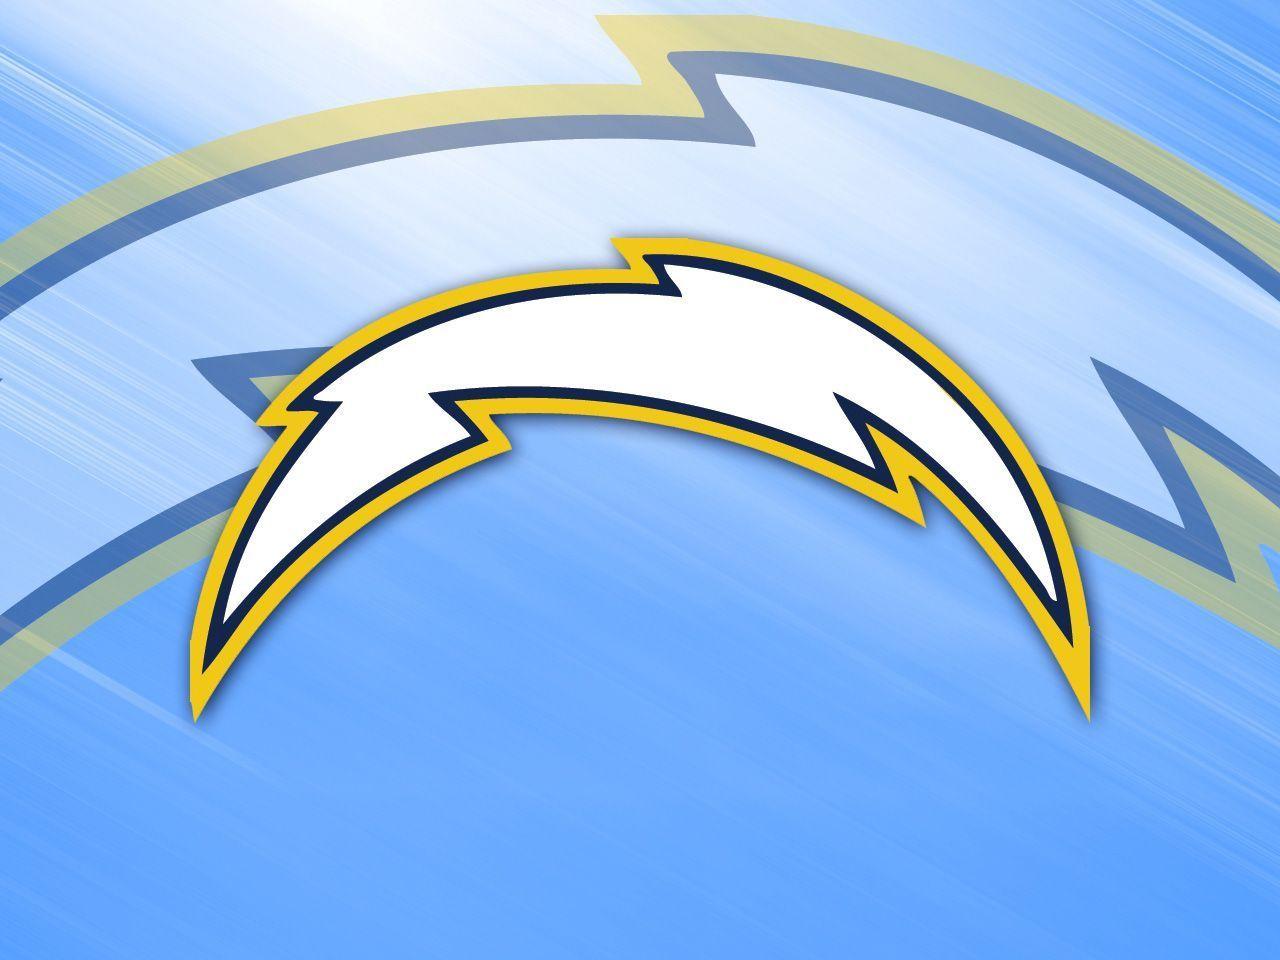 san diego chargers wallpaper Image, Graphics, Comments and Picture